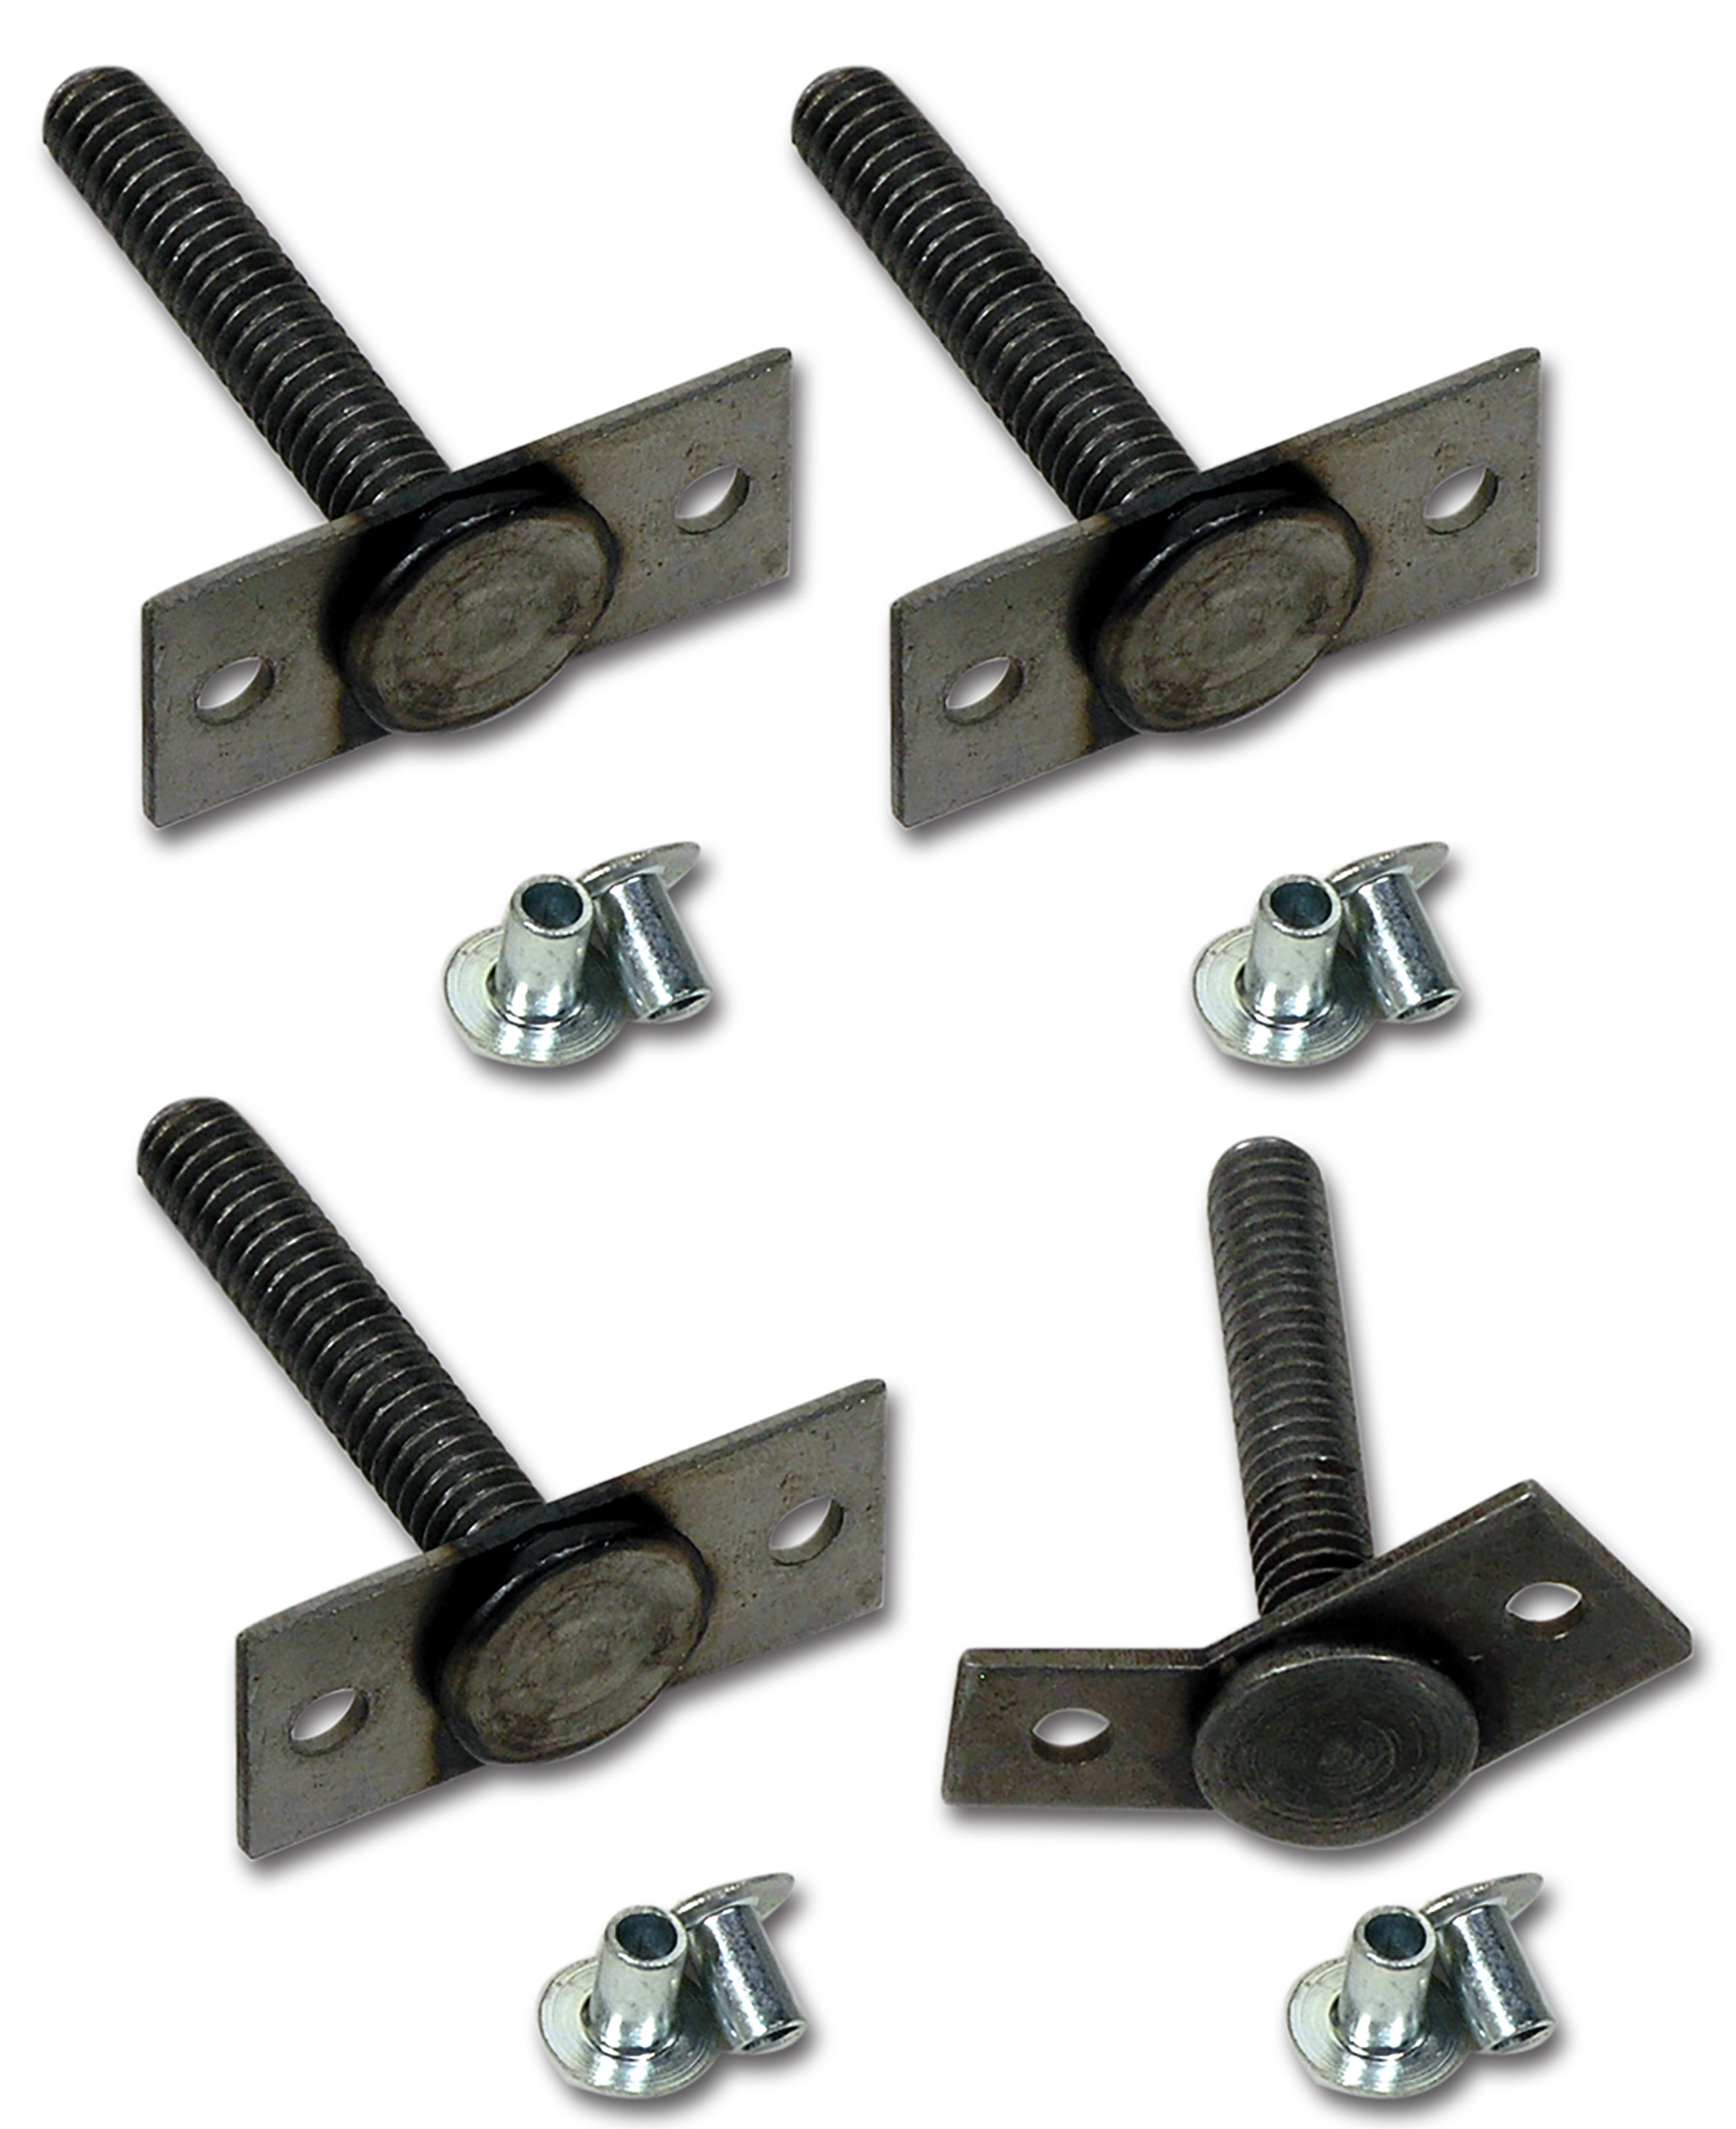 C2 1963-1967 Chevrolet Corvette Heater Box To Firewall Stud Set. W/O Air Conditioning - Auto Accessories of America